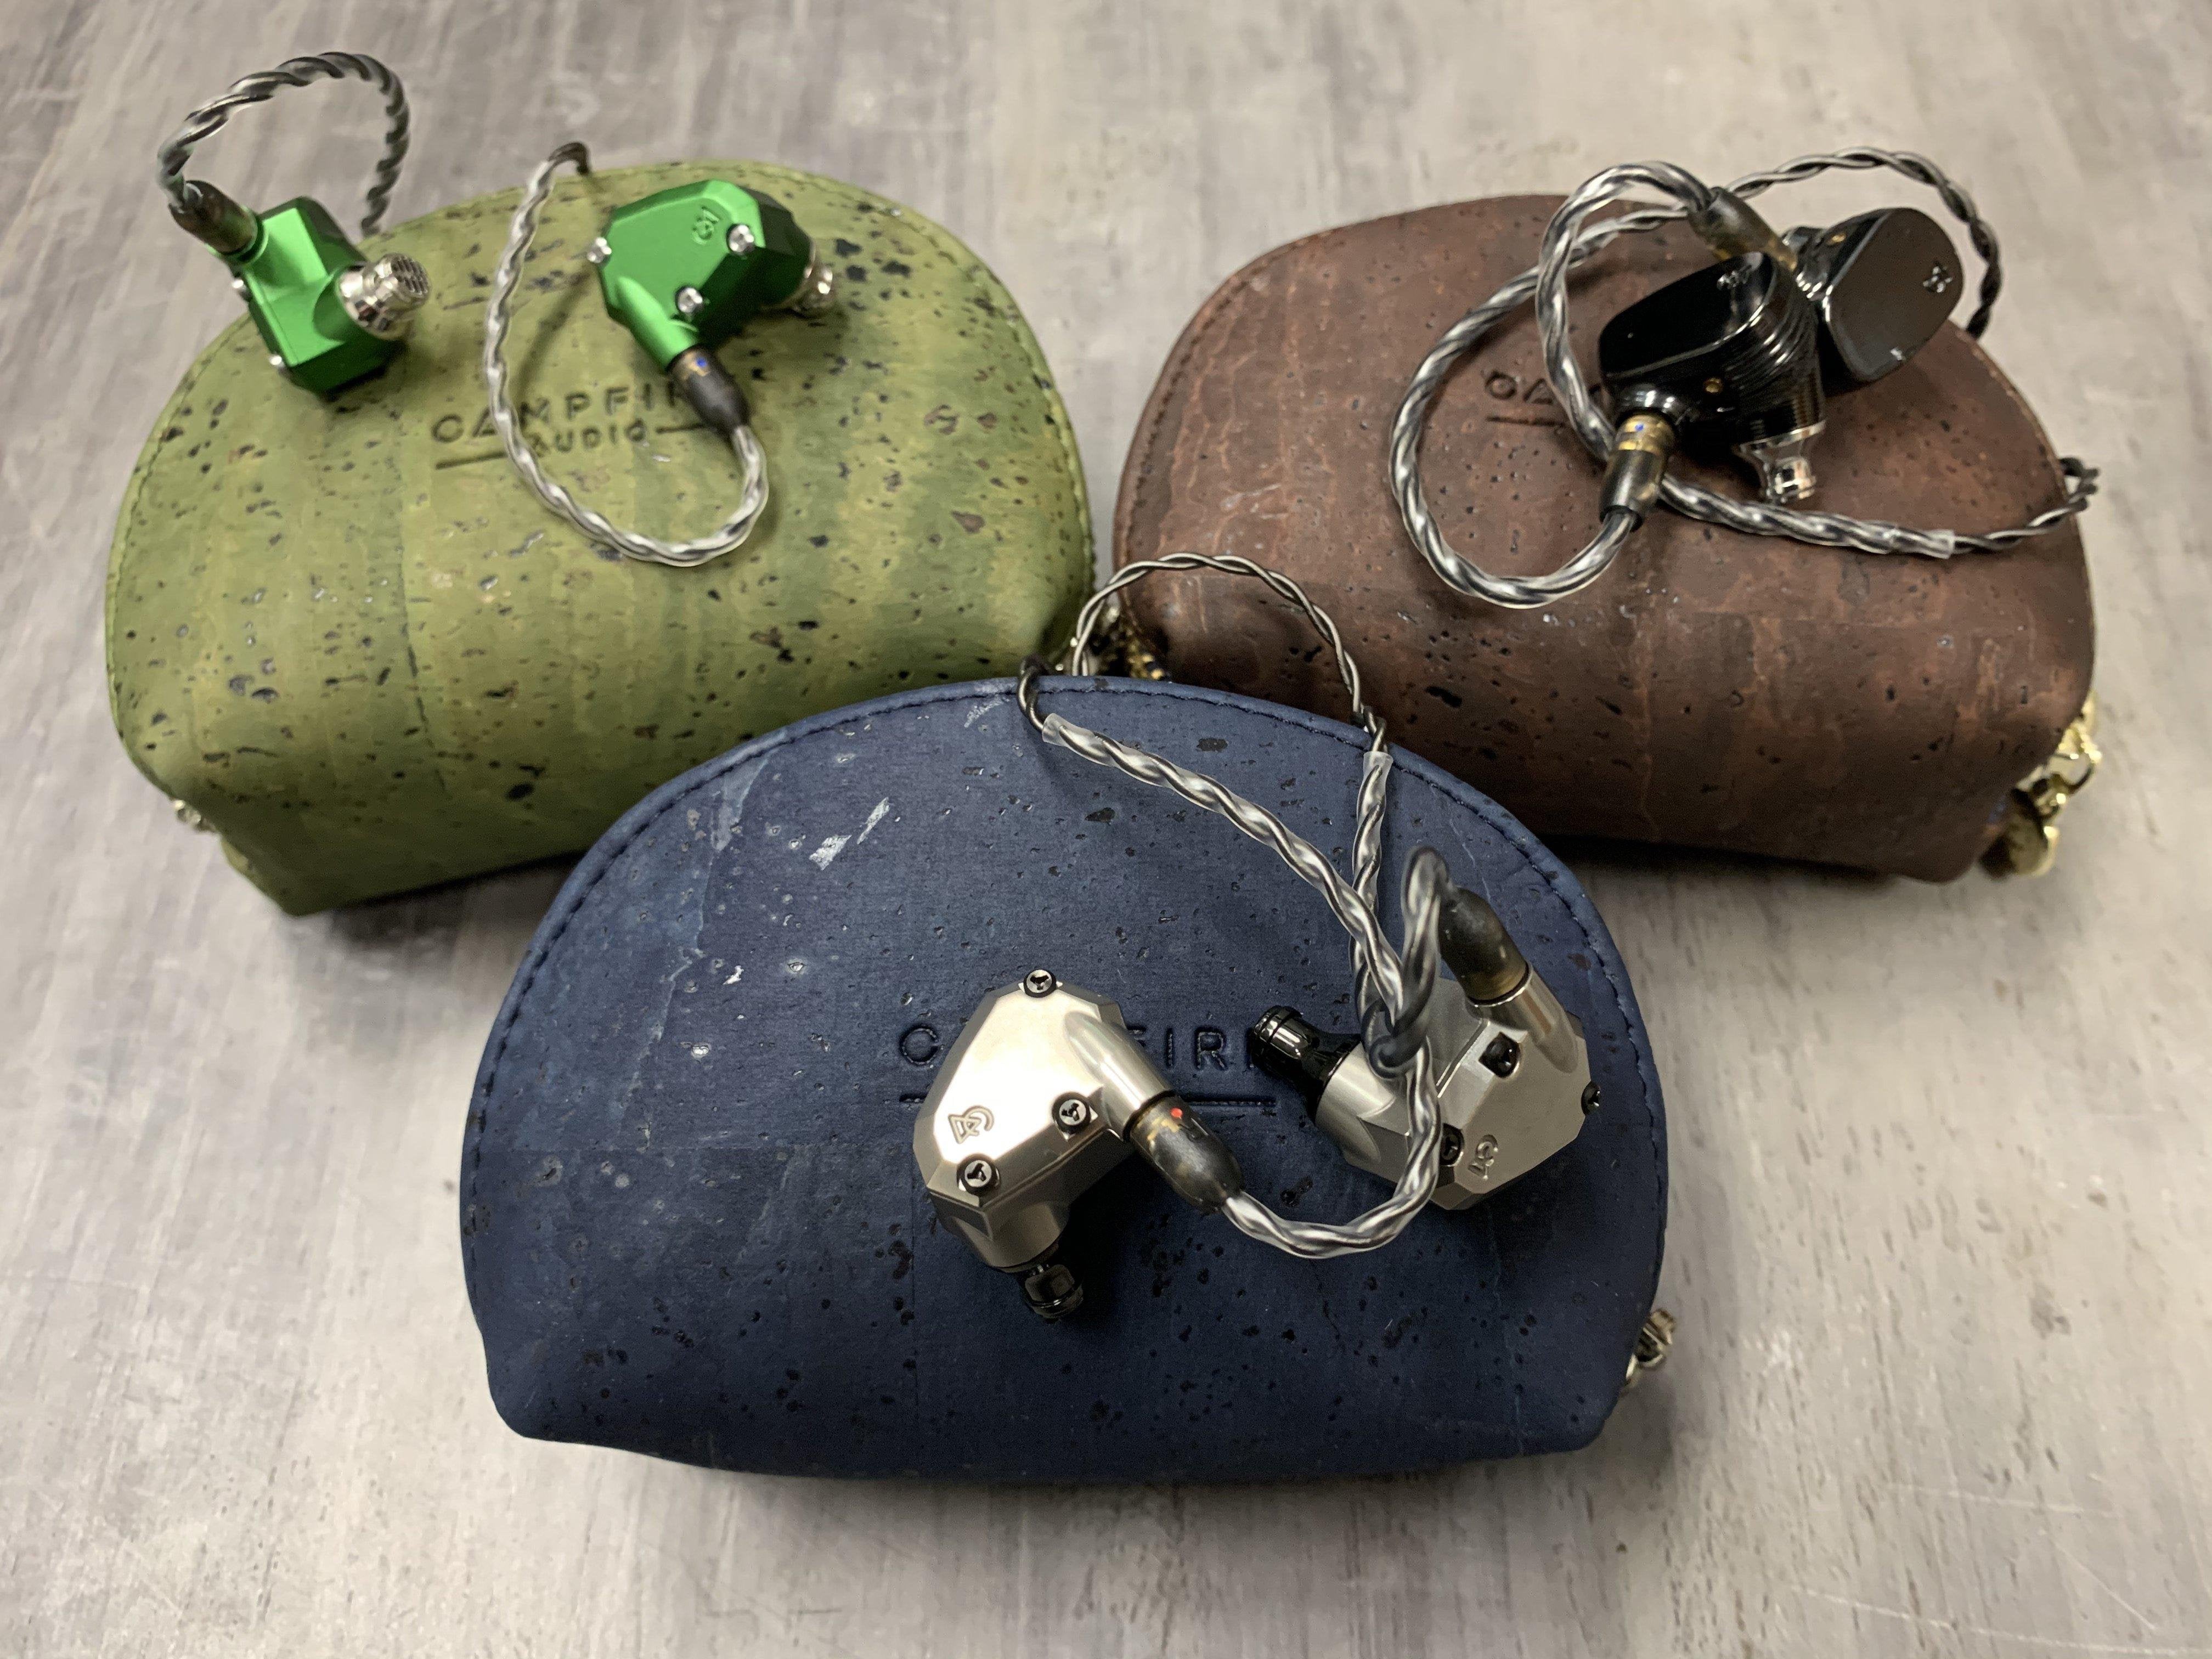 Campfire Audio 2020 Lineup – First Impressions-Bloom Audio